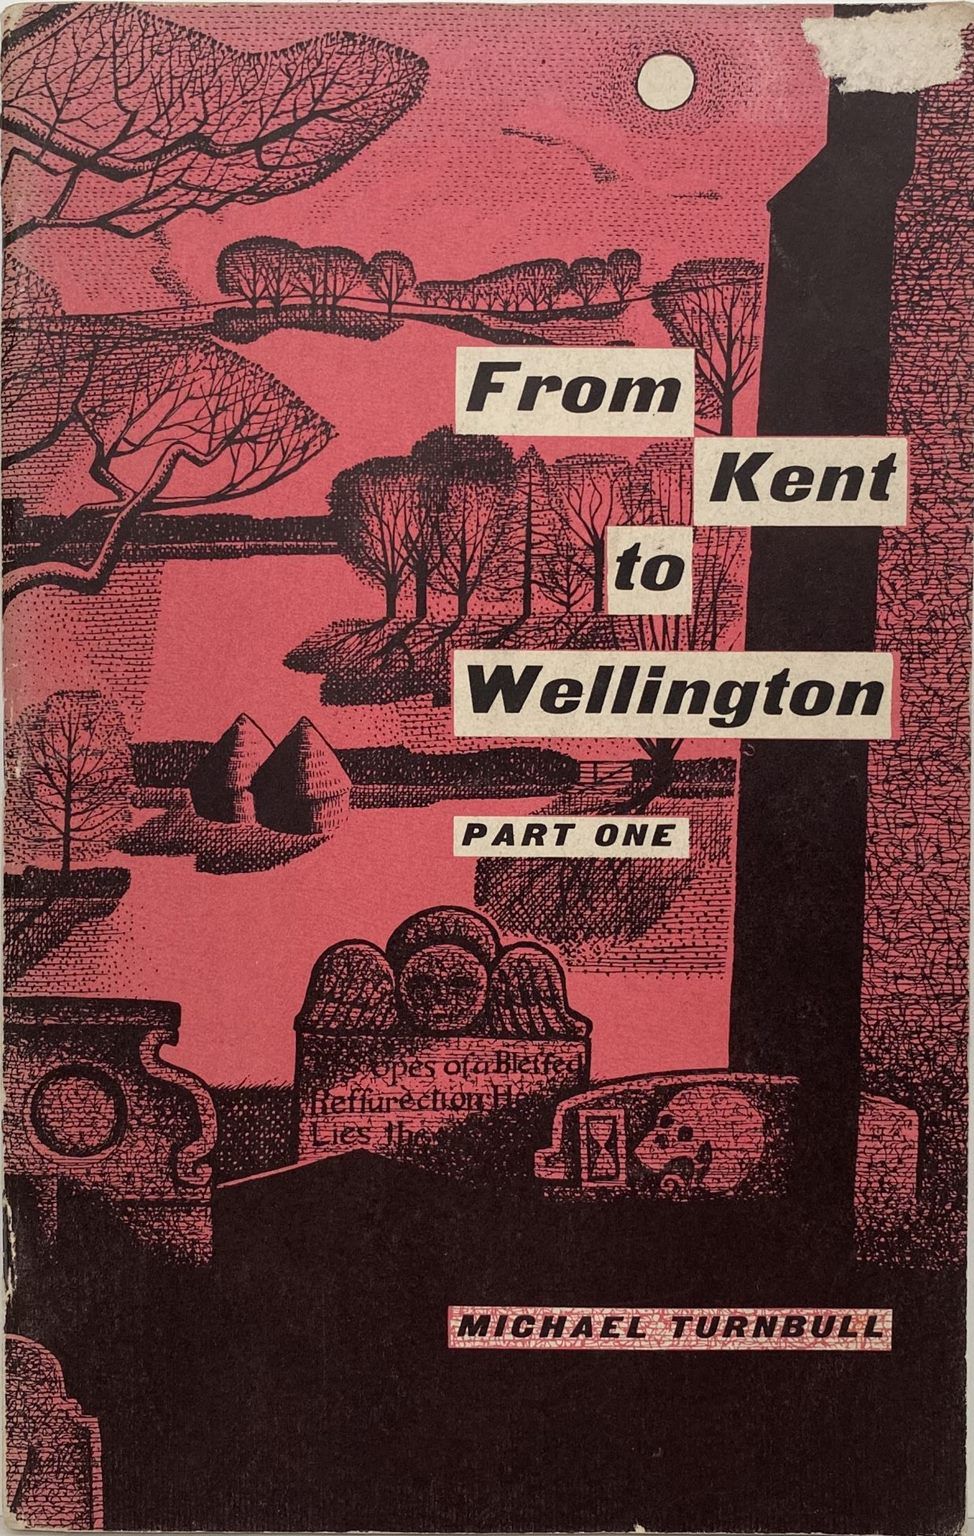 FROM KENT TO WELLINGTON: Part One